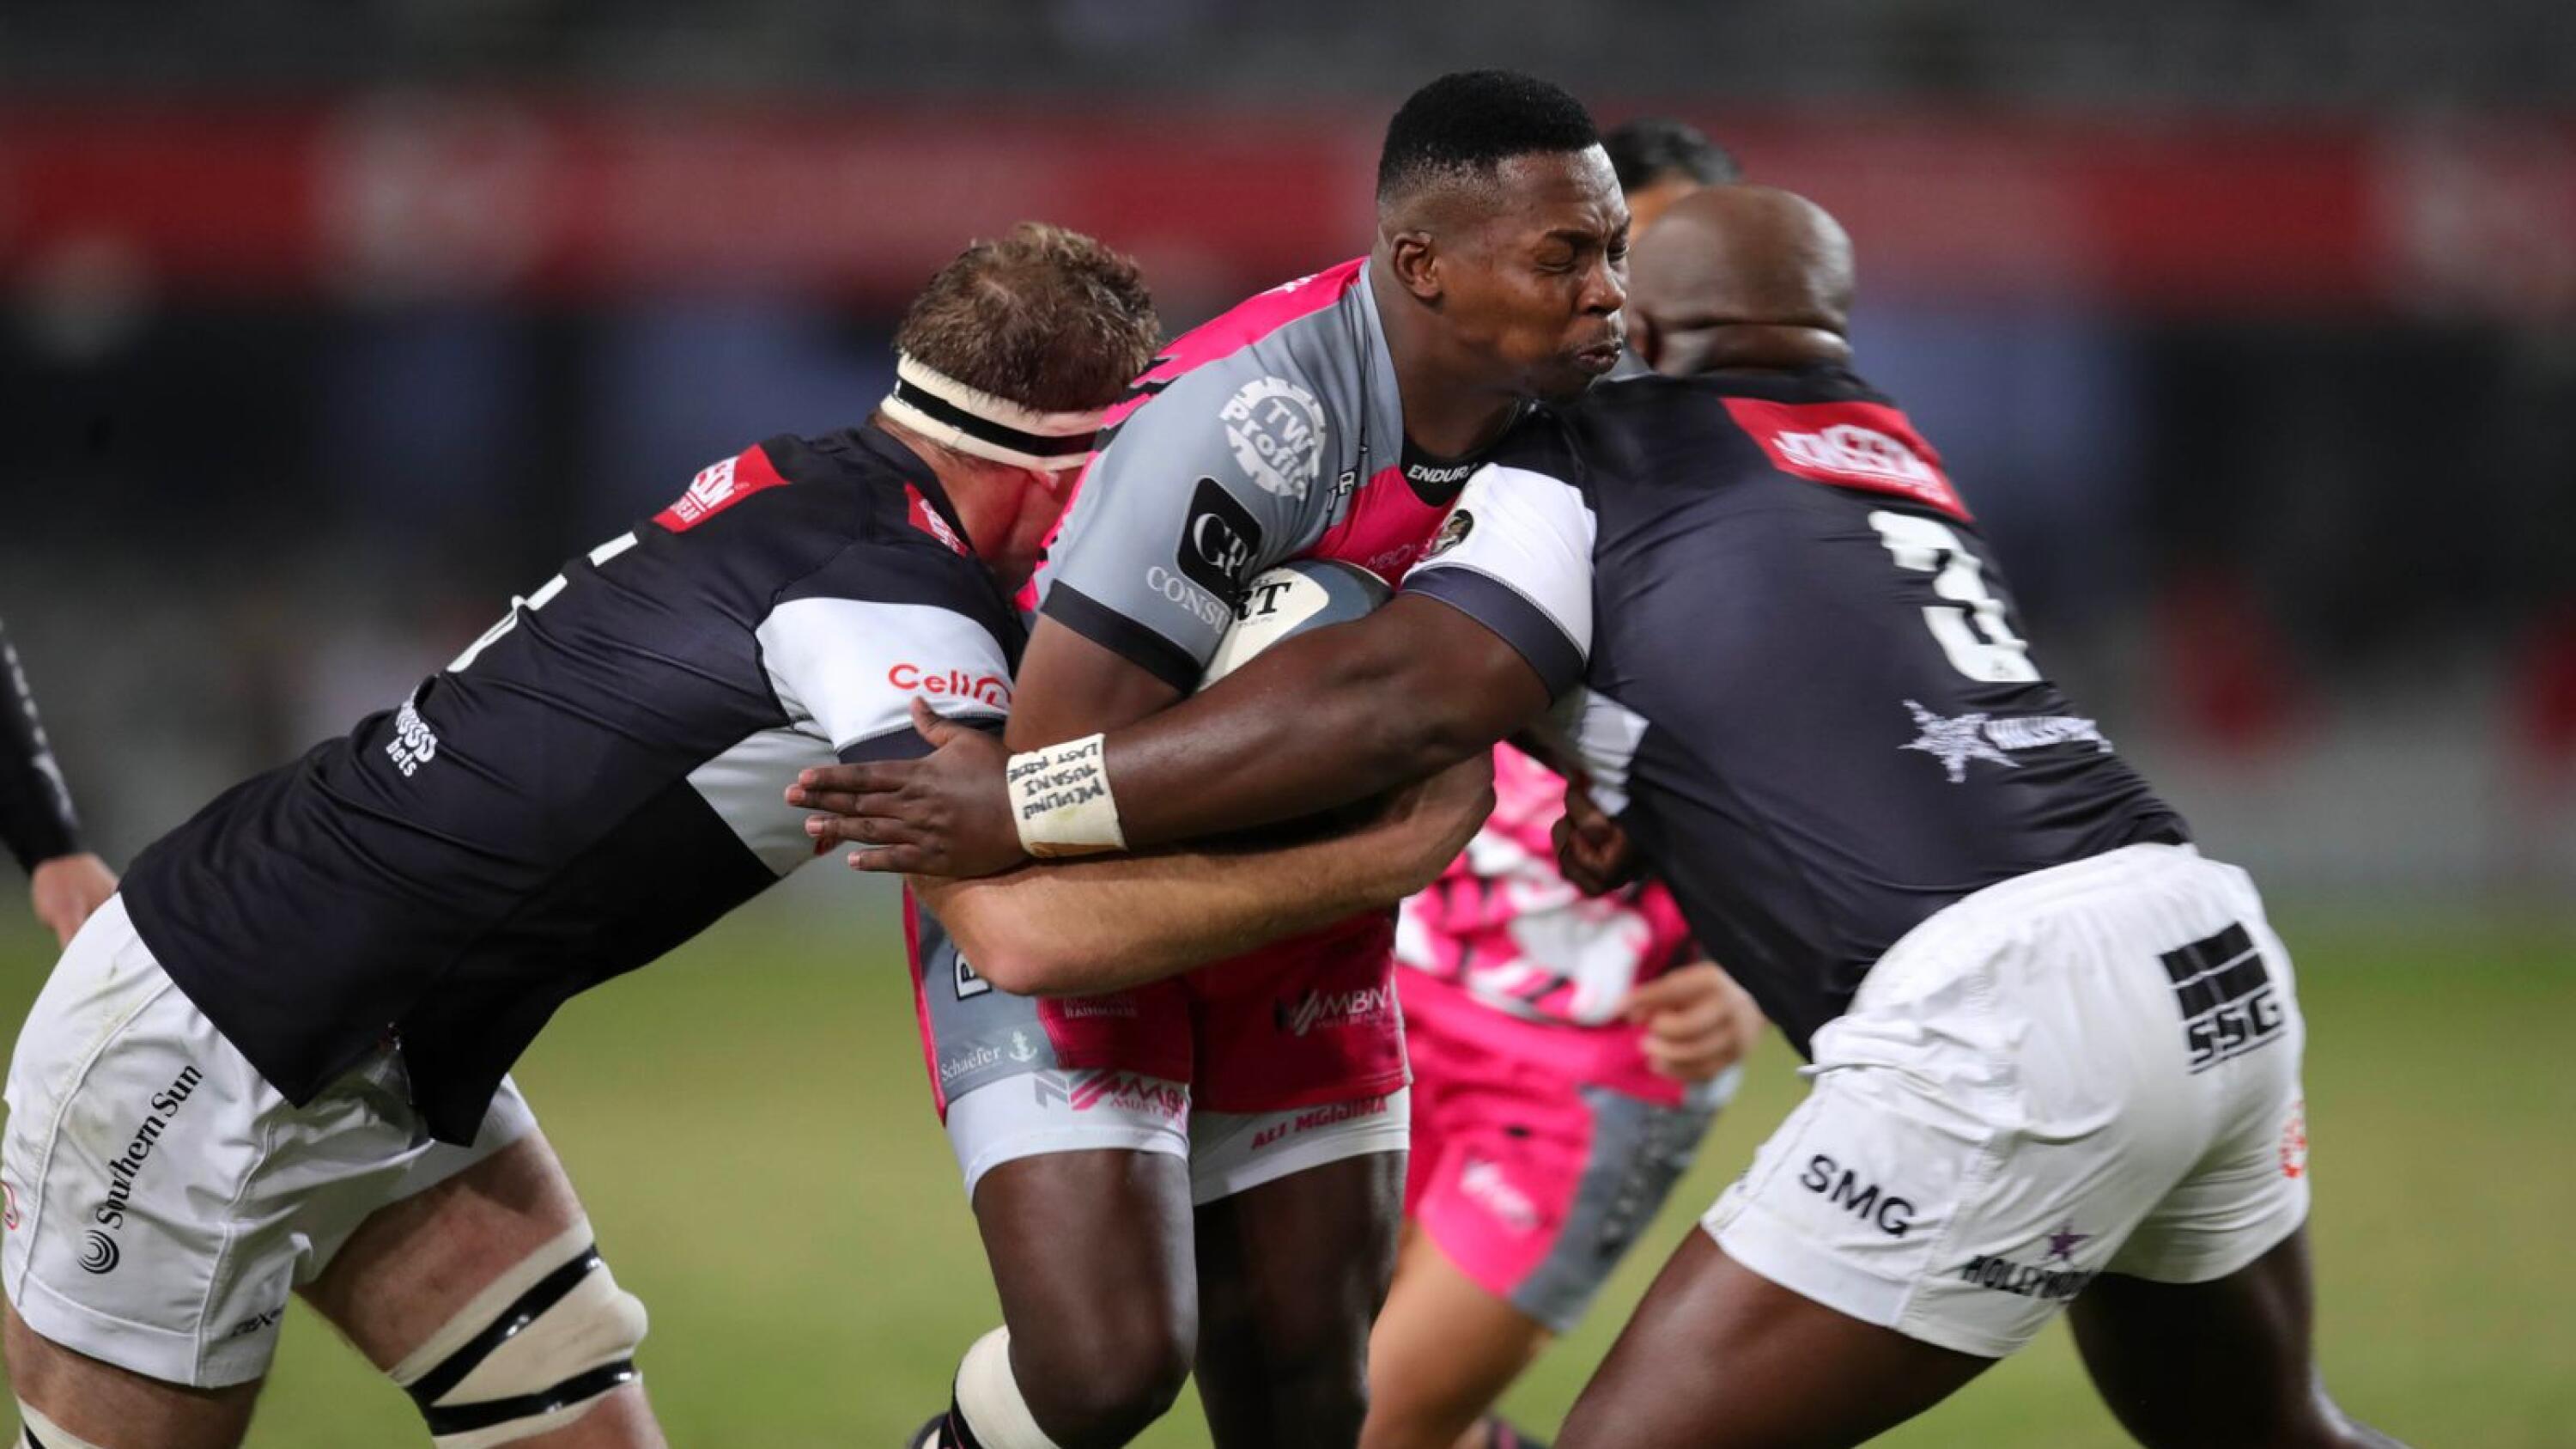 Ali Mgijima of Pumas is challenged by Reniel Hugo and Khuthazani Mchunu of the Sharks during their Currie Cup semi-final at Kings Park in Durban on Saturday